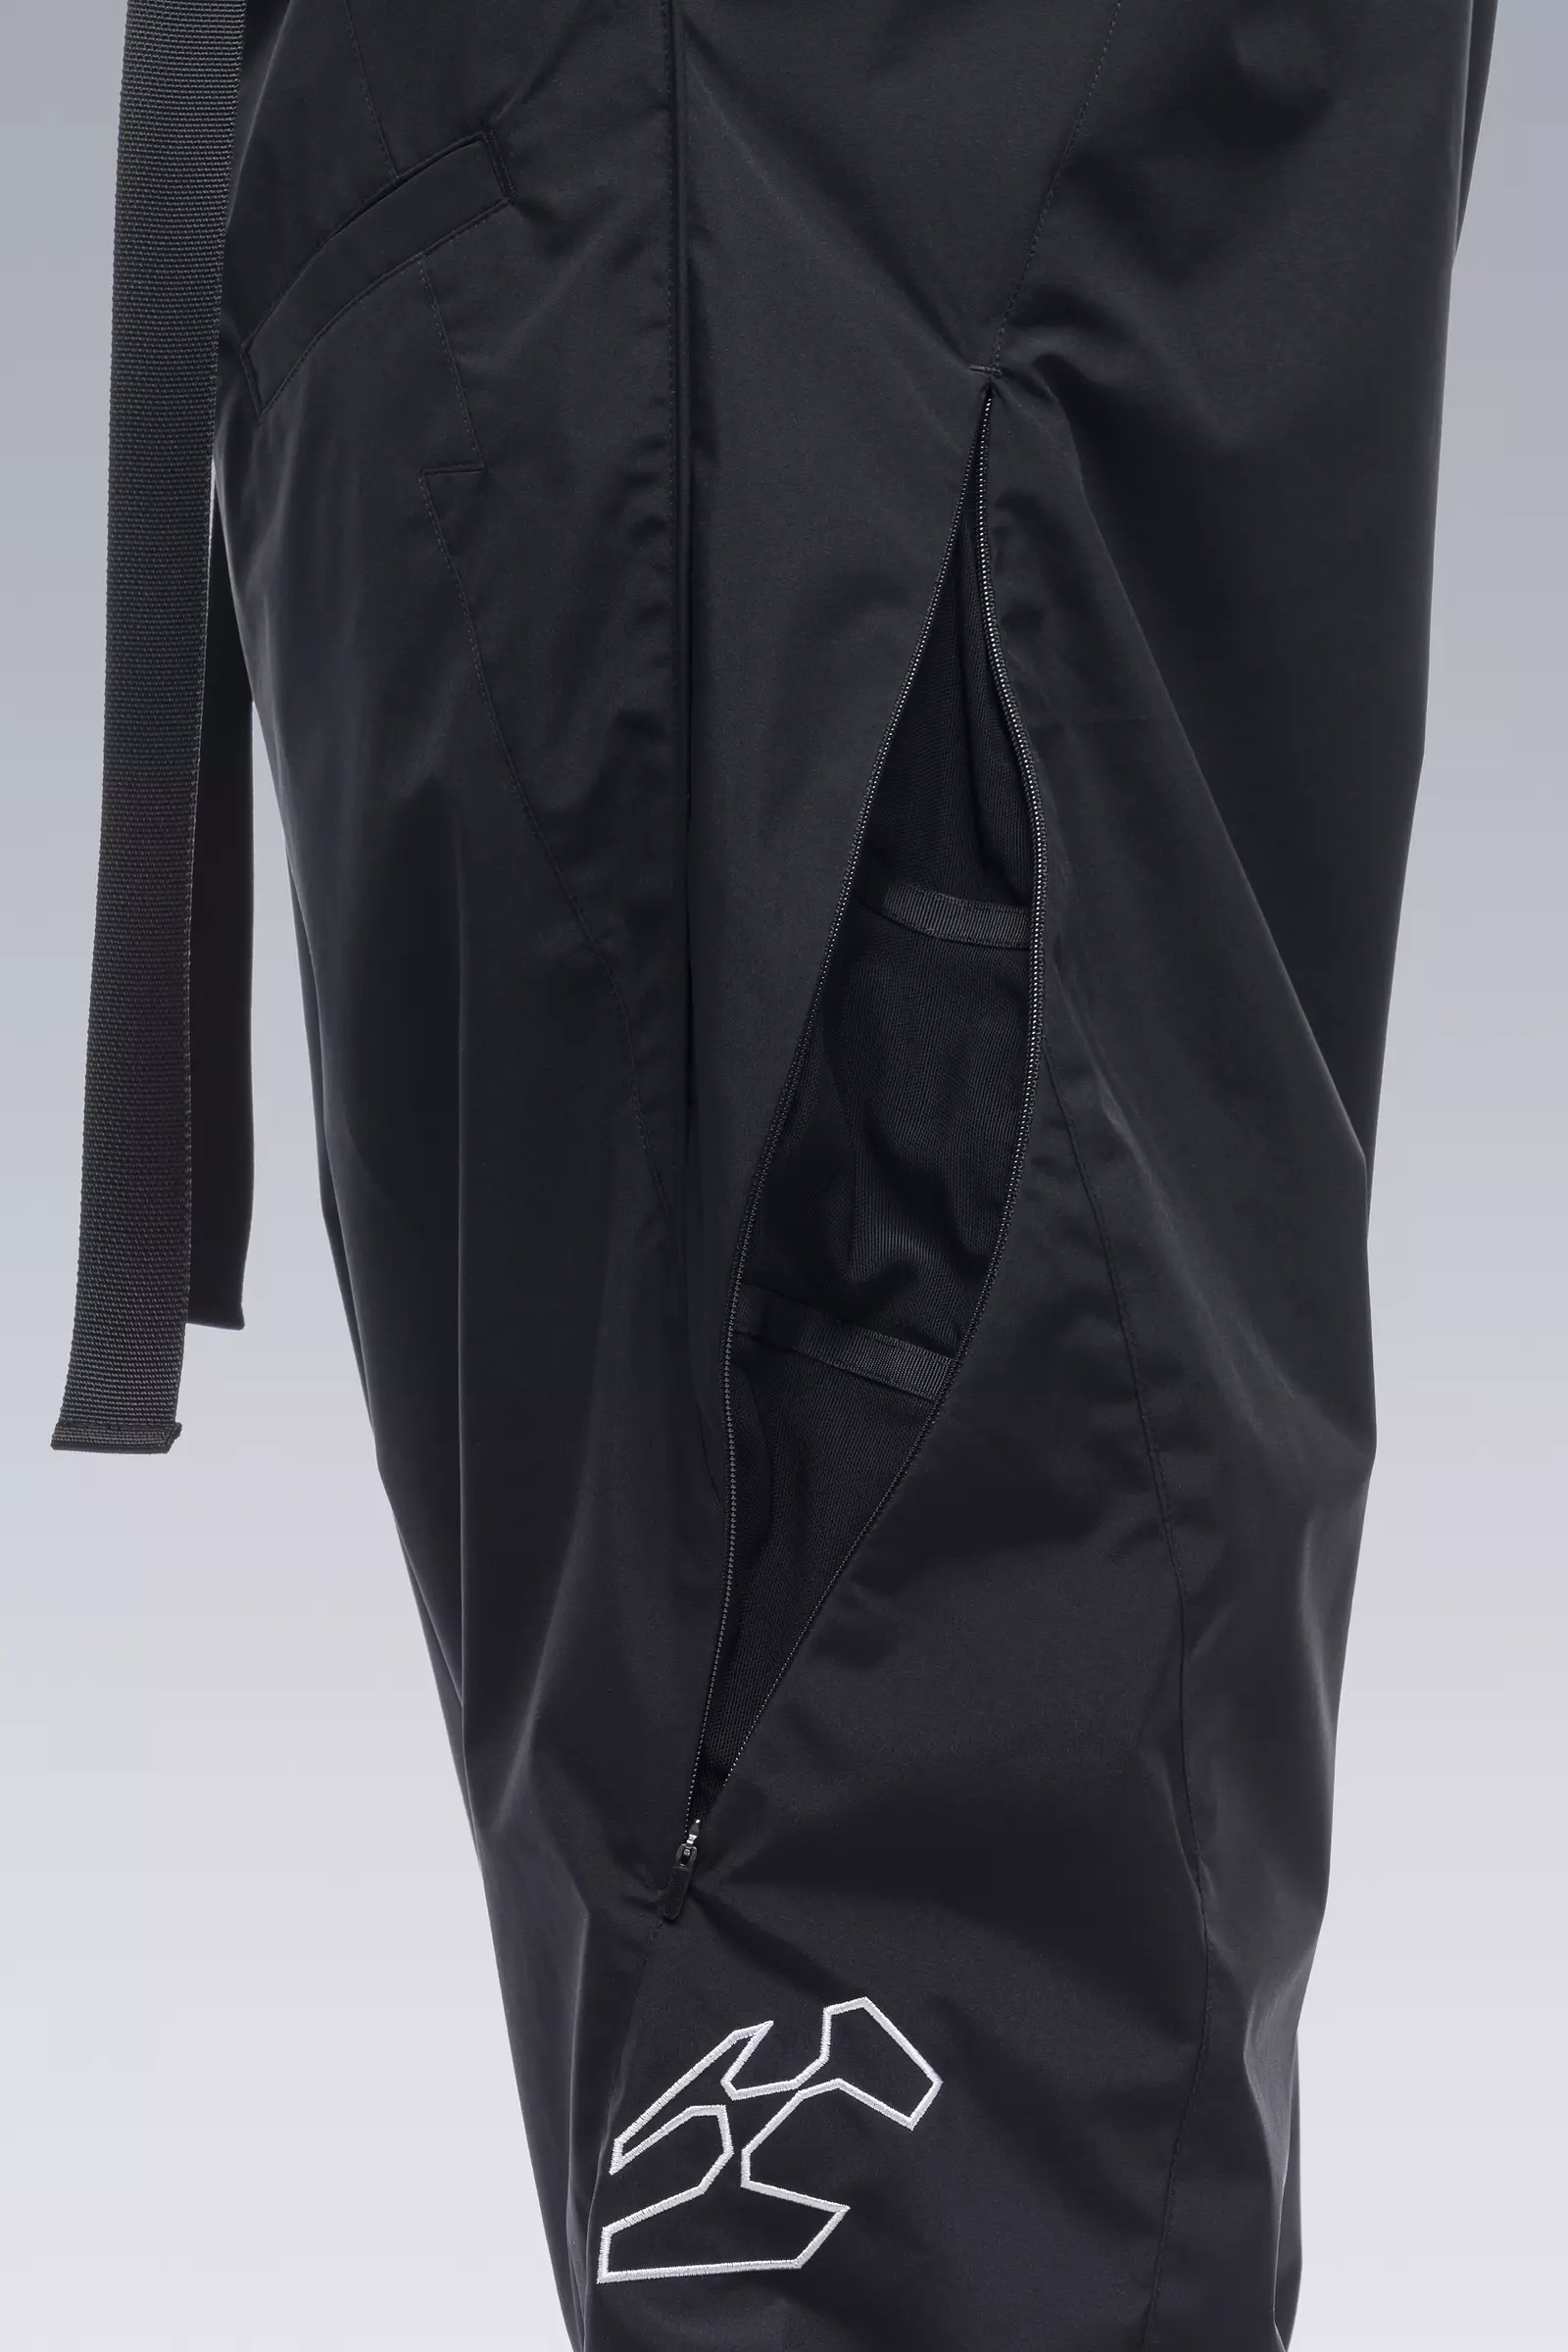 P53-WS 2L Gore-Tex® Windstopper® Insulated Vent Pants Black - 22